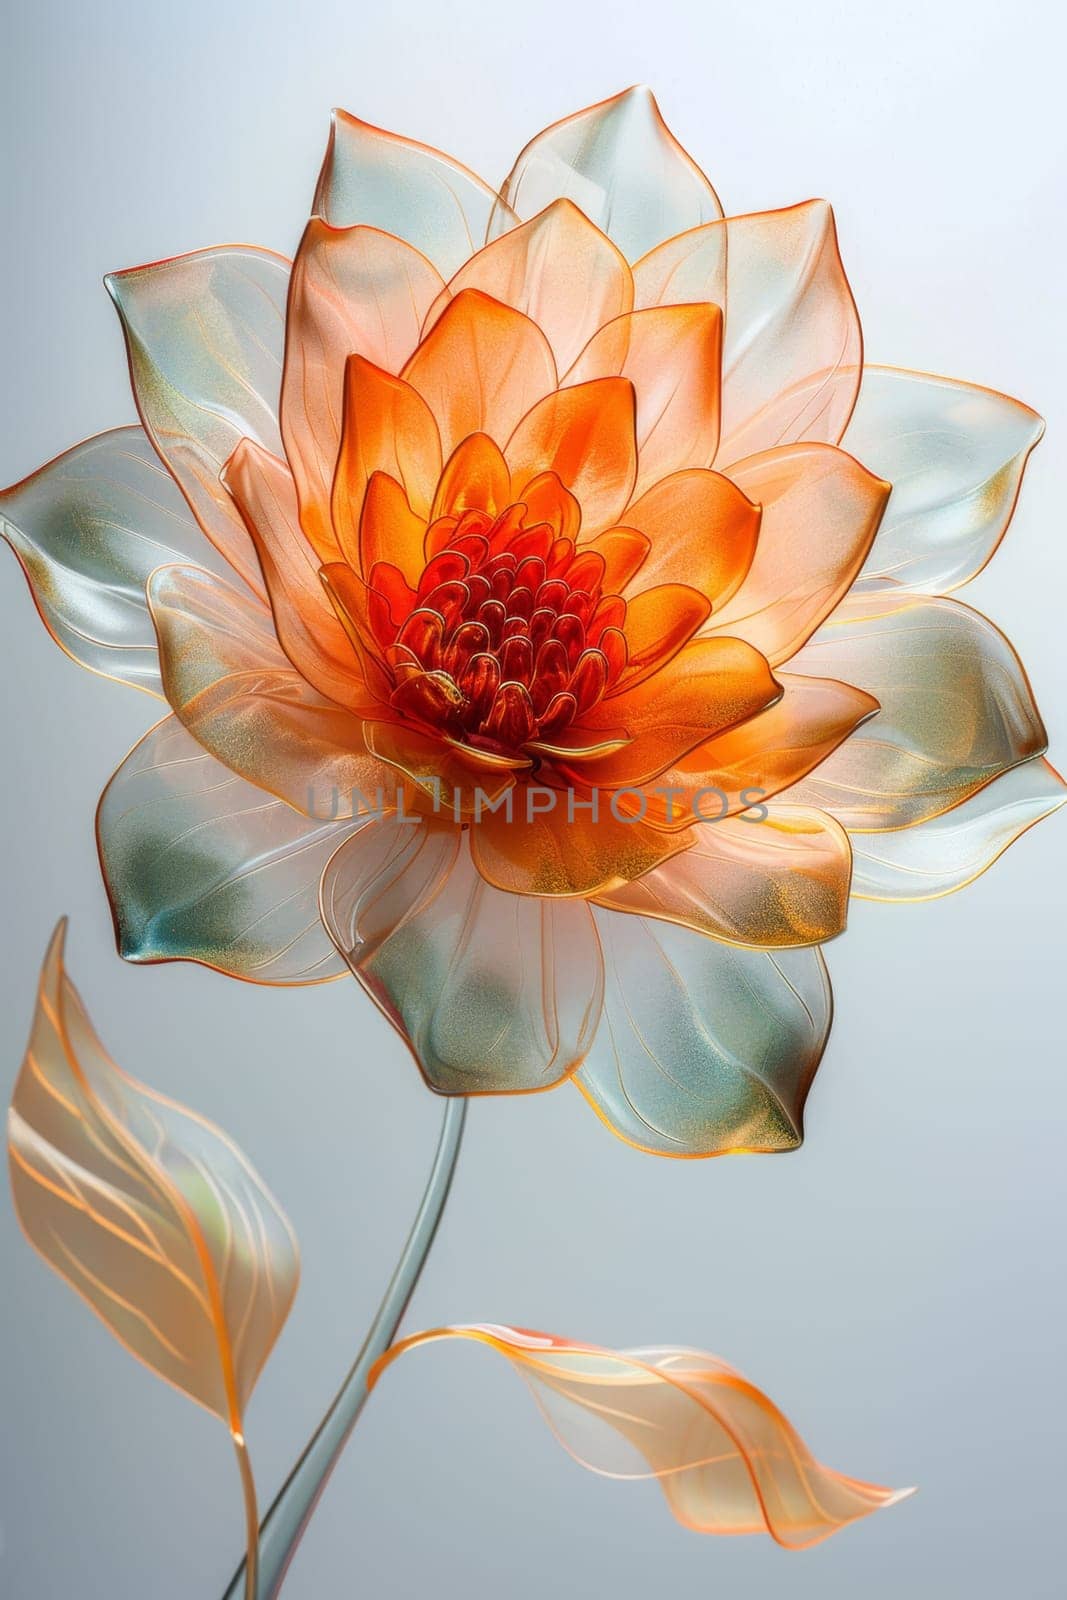 A magical orange flower with petals on a white background.